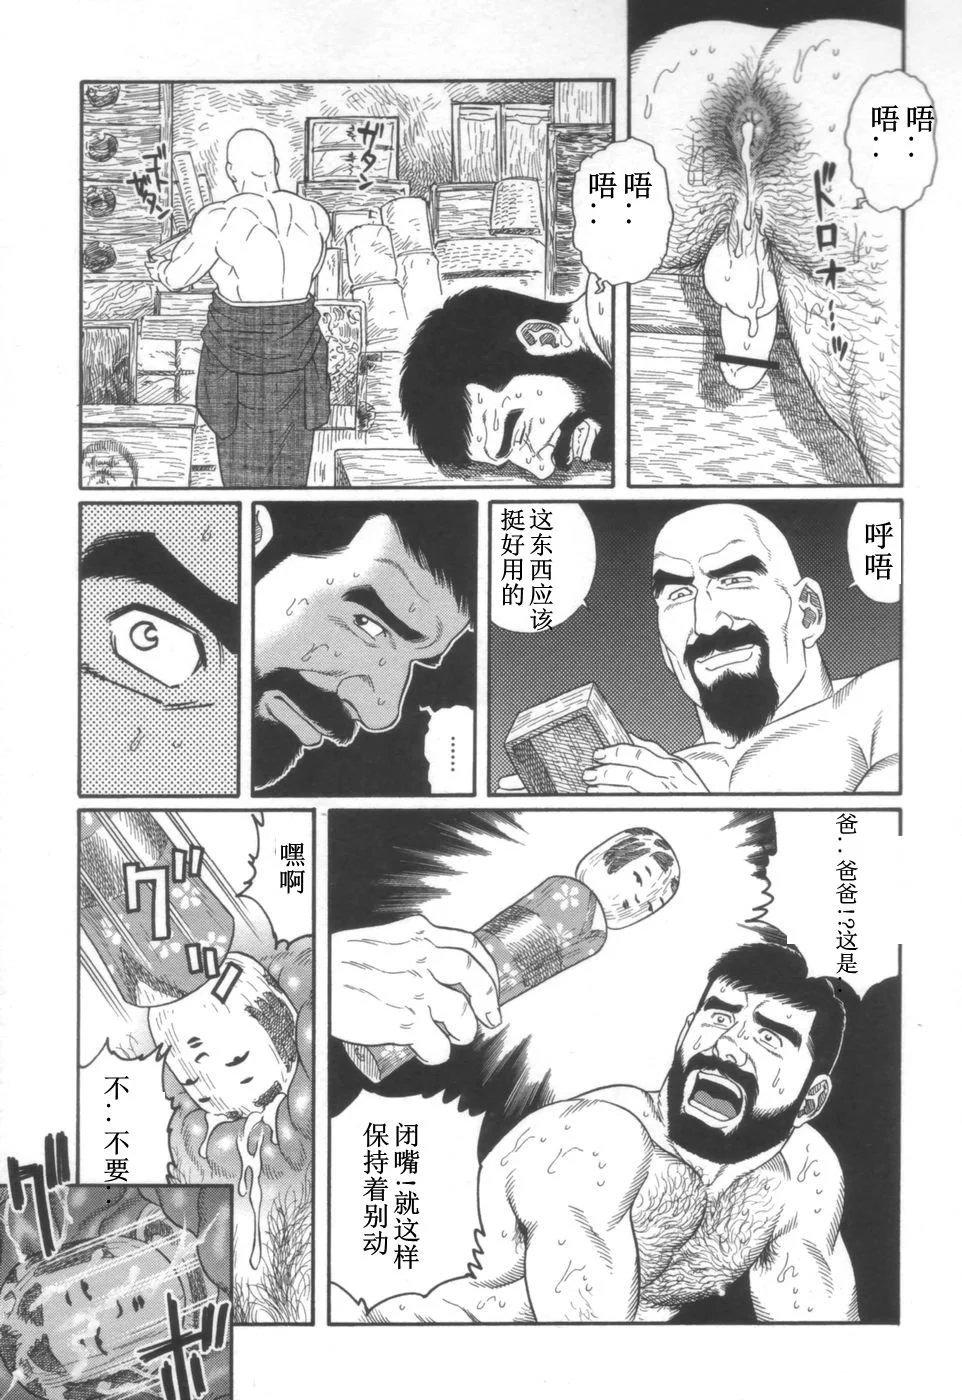 Kinky Gedou no Ie Joukan | 邪道之家 Vol. 1 Ch.3 Gozada - Page 11